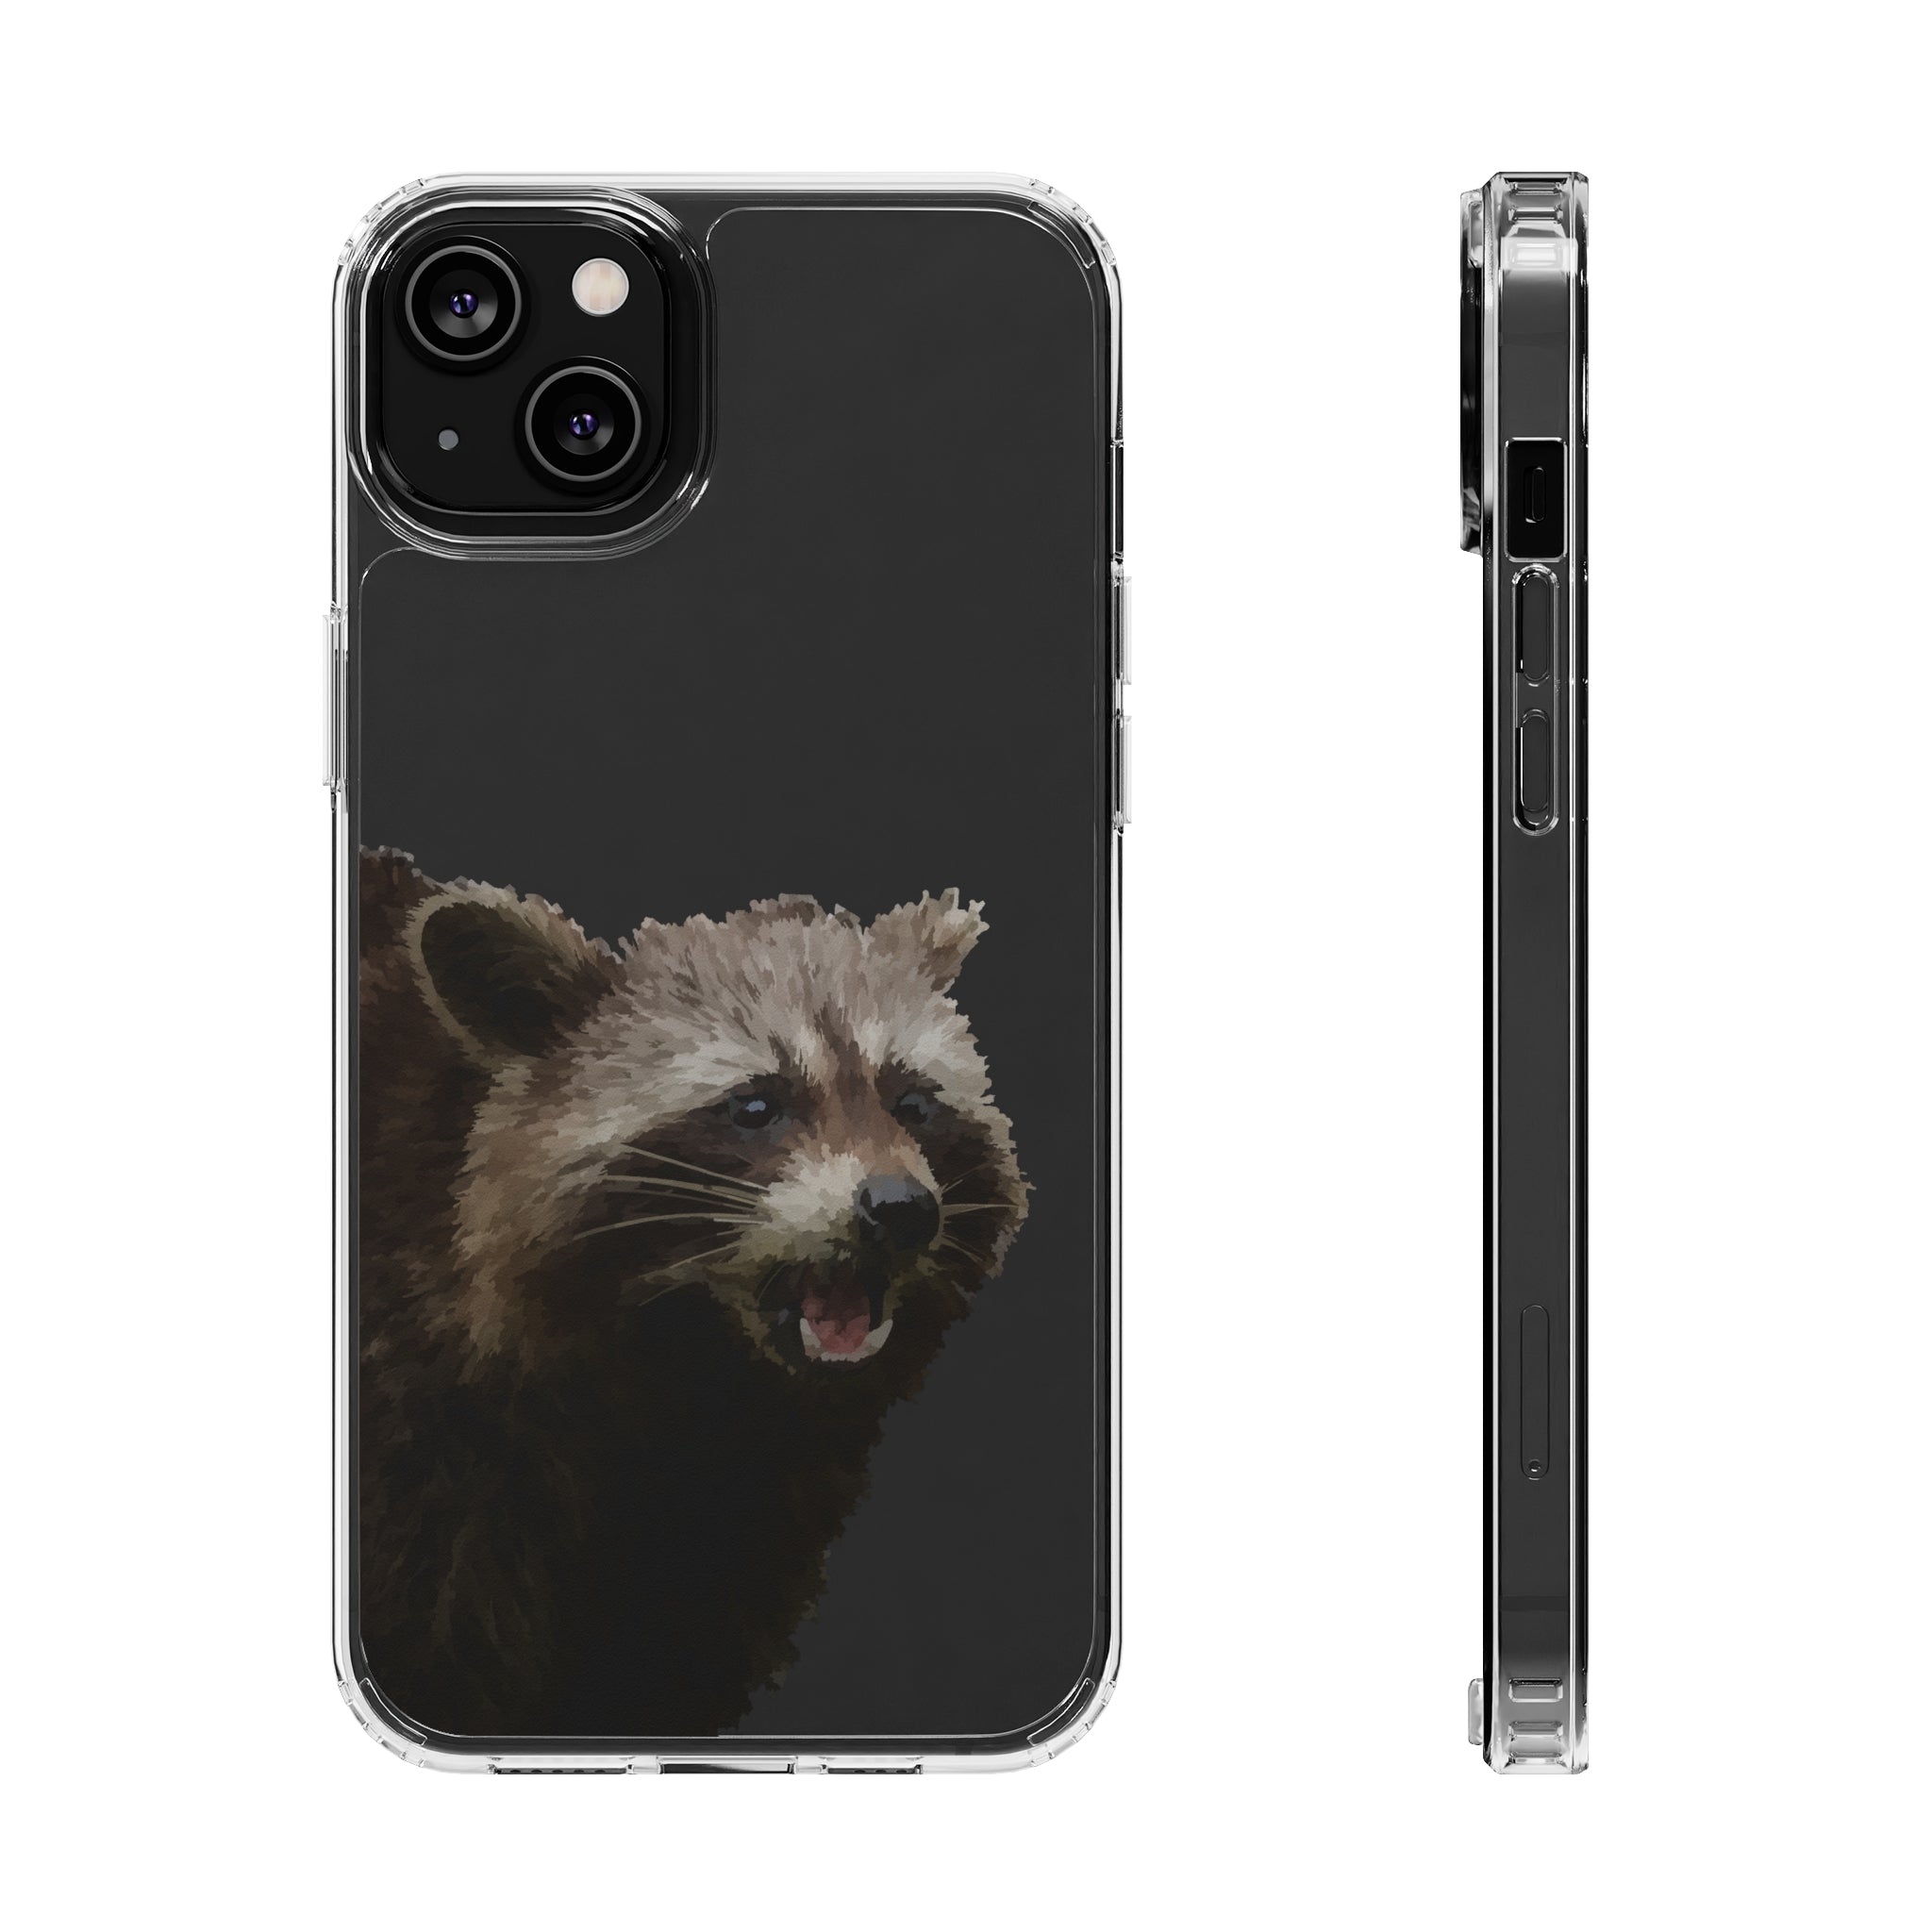 Main image of Angry Raccoon iPhone Case